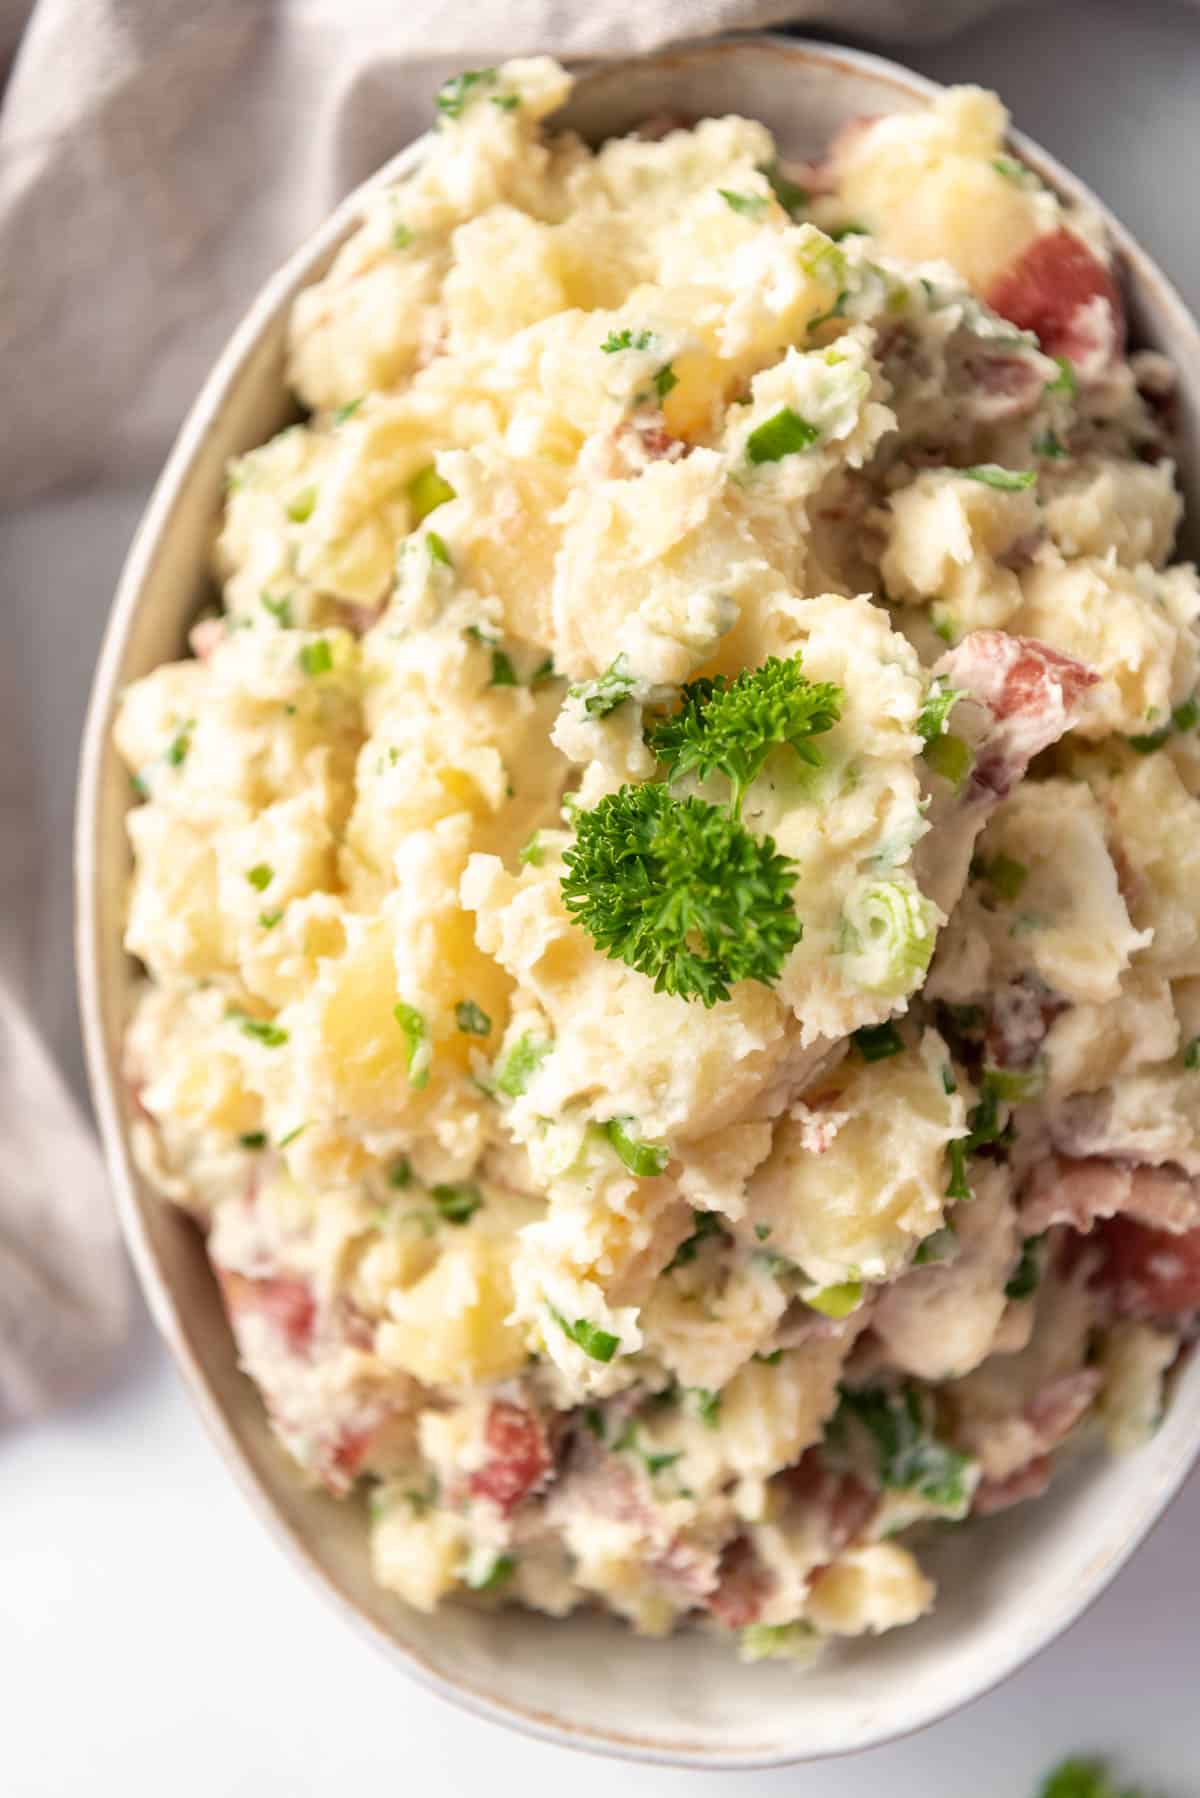 A sprig of parsley on top of a bowl of Greek potato salad.